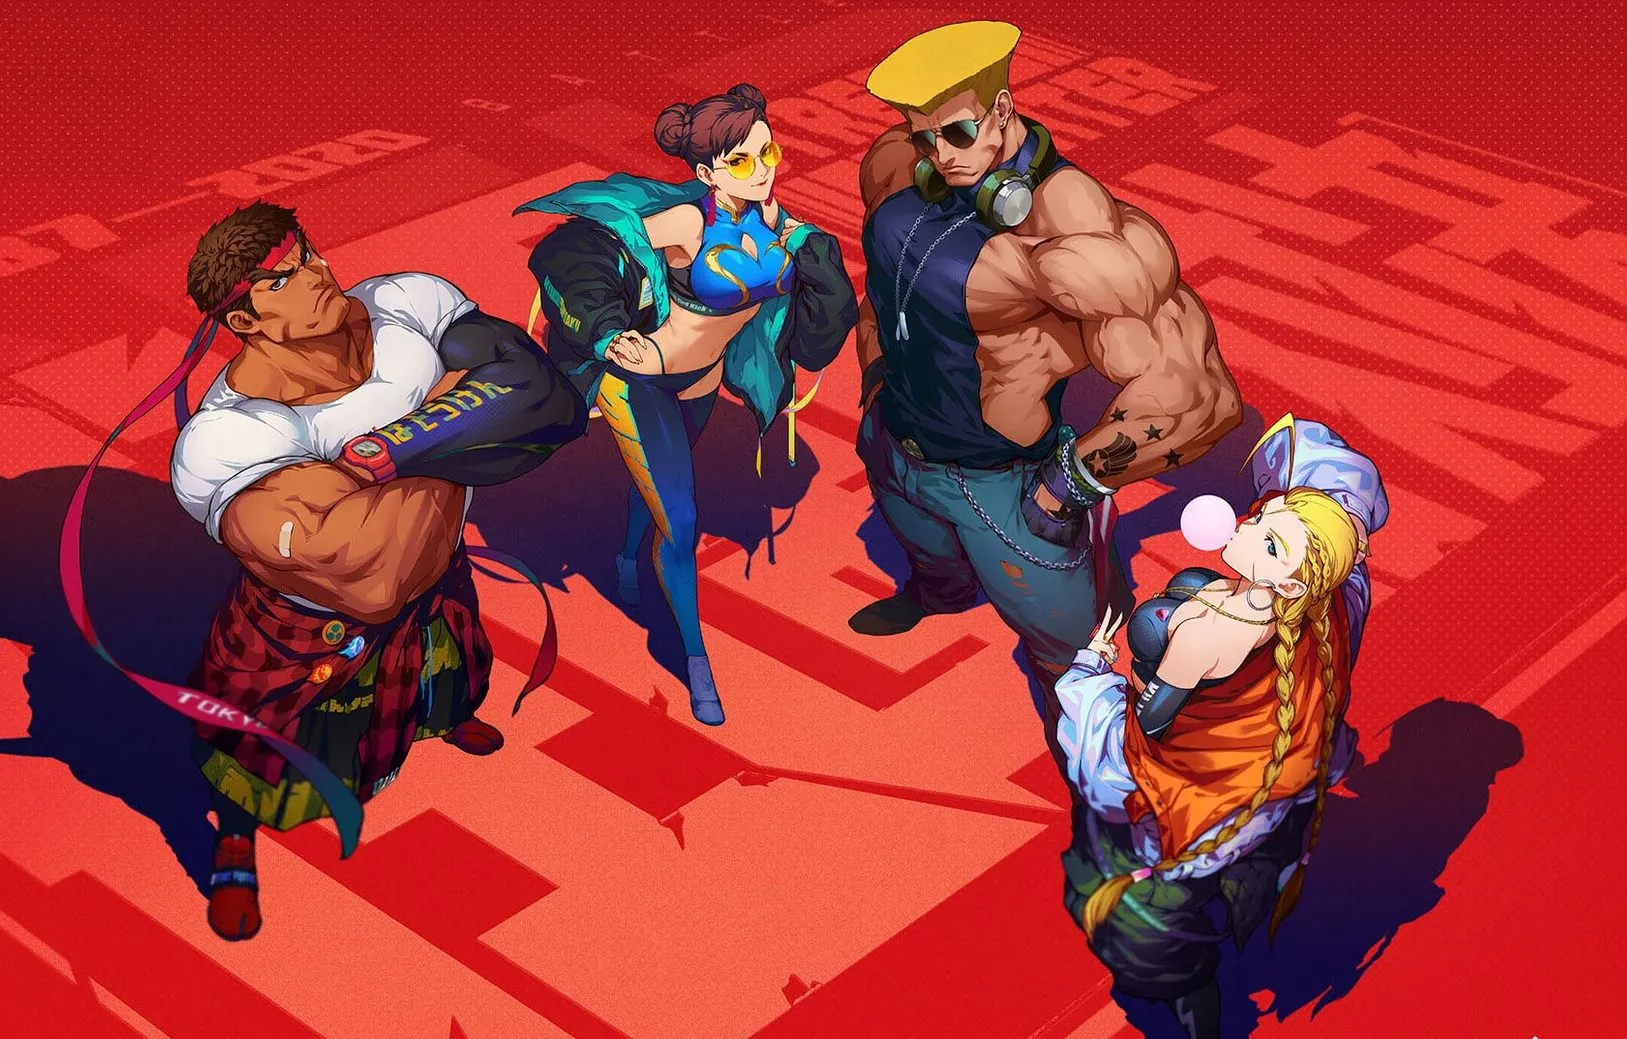 New Street Fighter Title Coming To Mobile Platforms - Droid Gamers